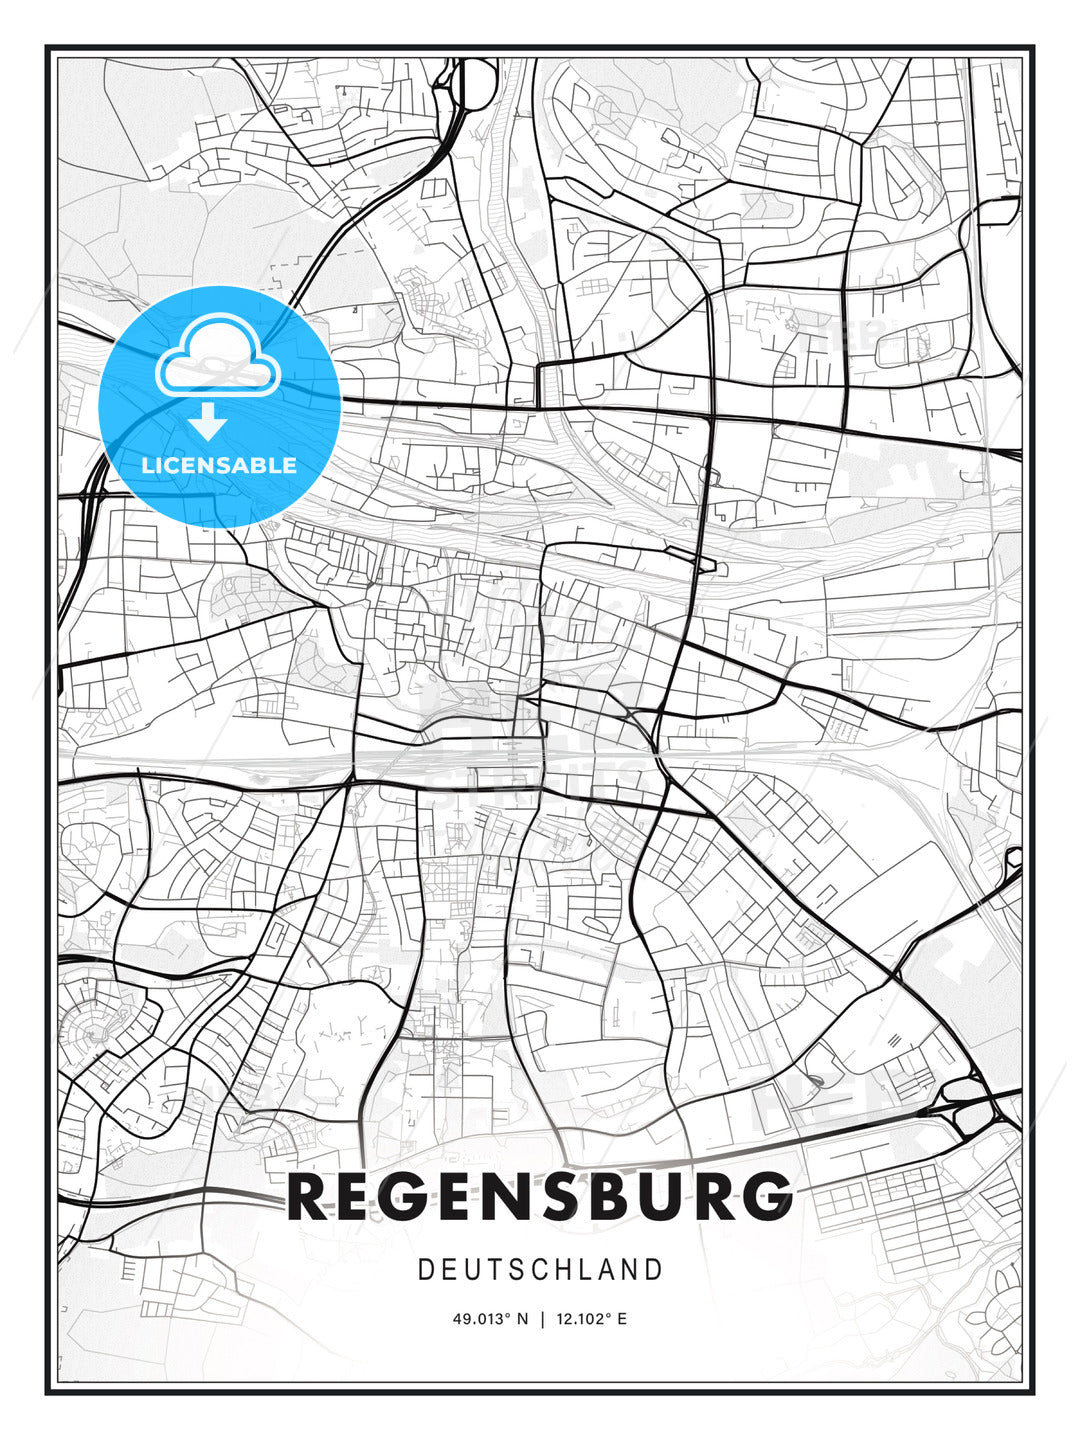 Regensburg, Germany, Modern Print Template in Various Formats - HEBSTREITS Sketches